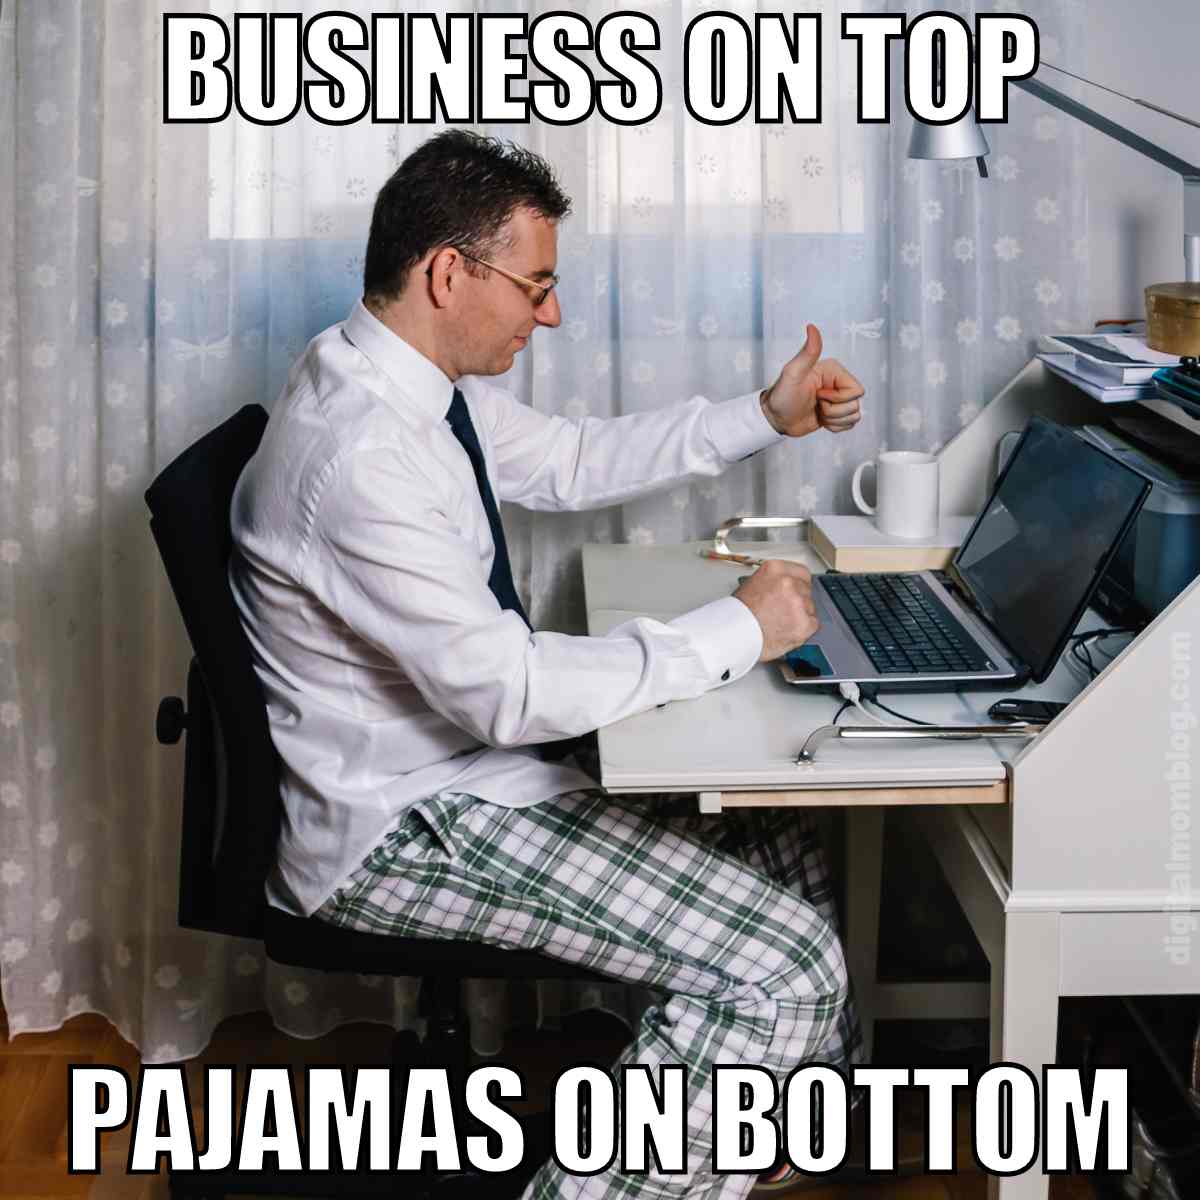 man working at laptop with pajama bottoms and business shirt and tie